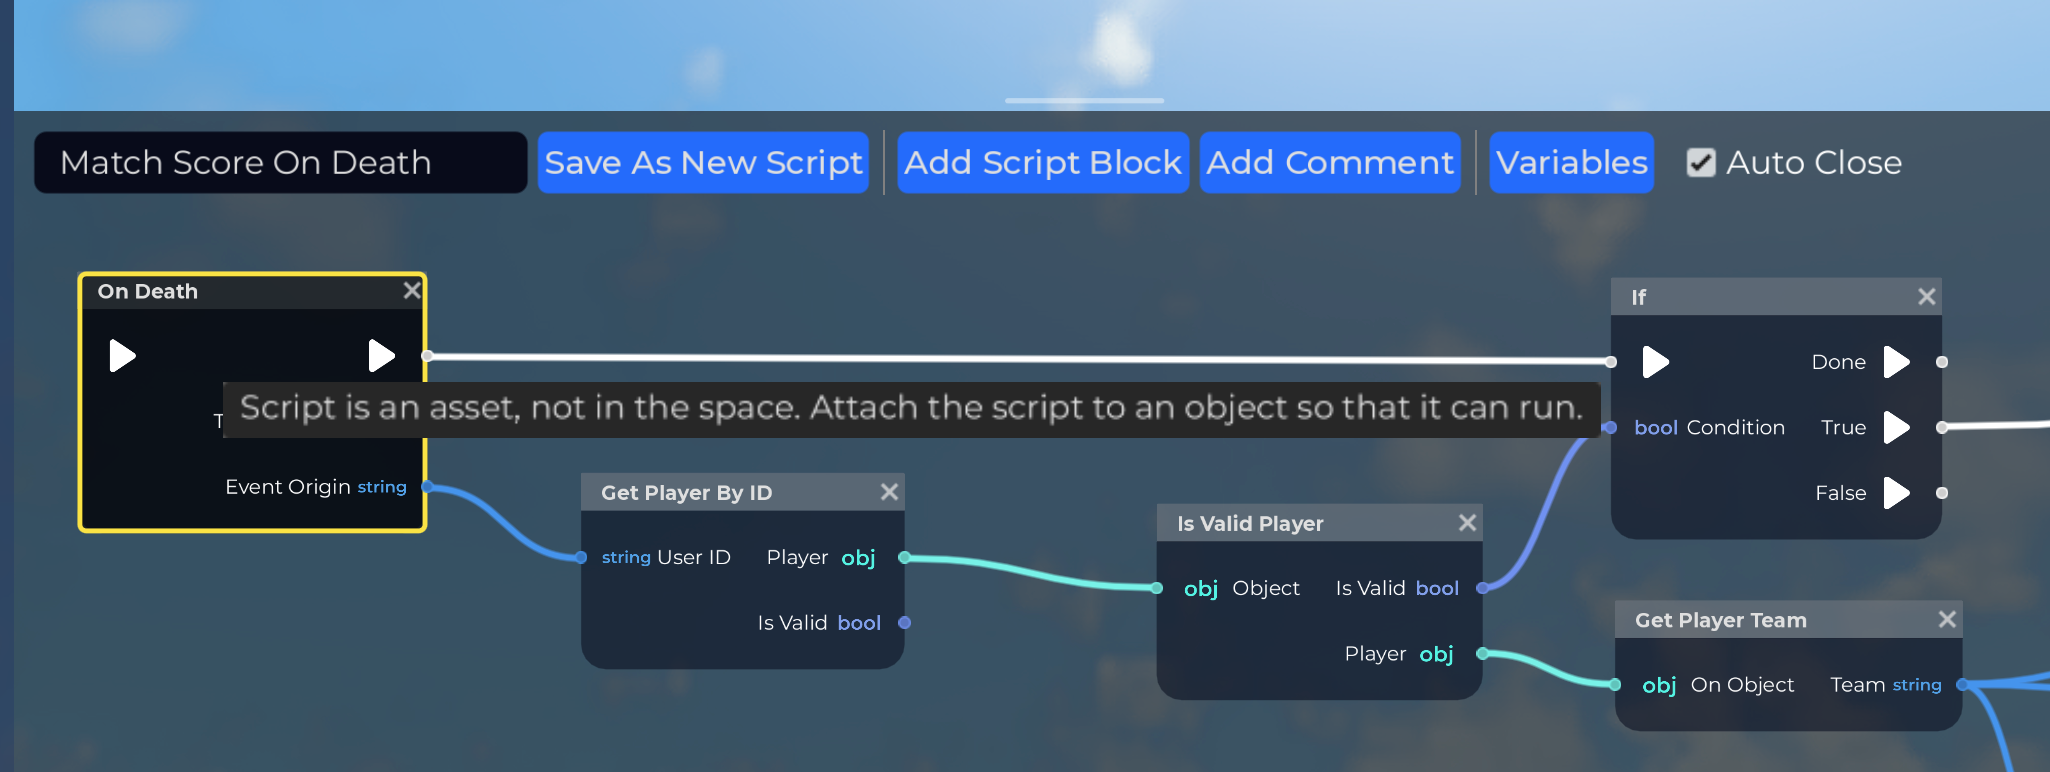 Script editor editing a script asset with a yellow outline around the entry block